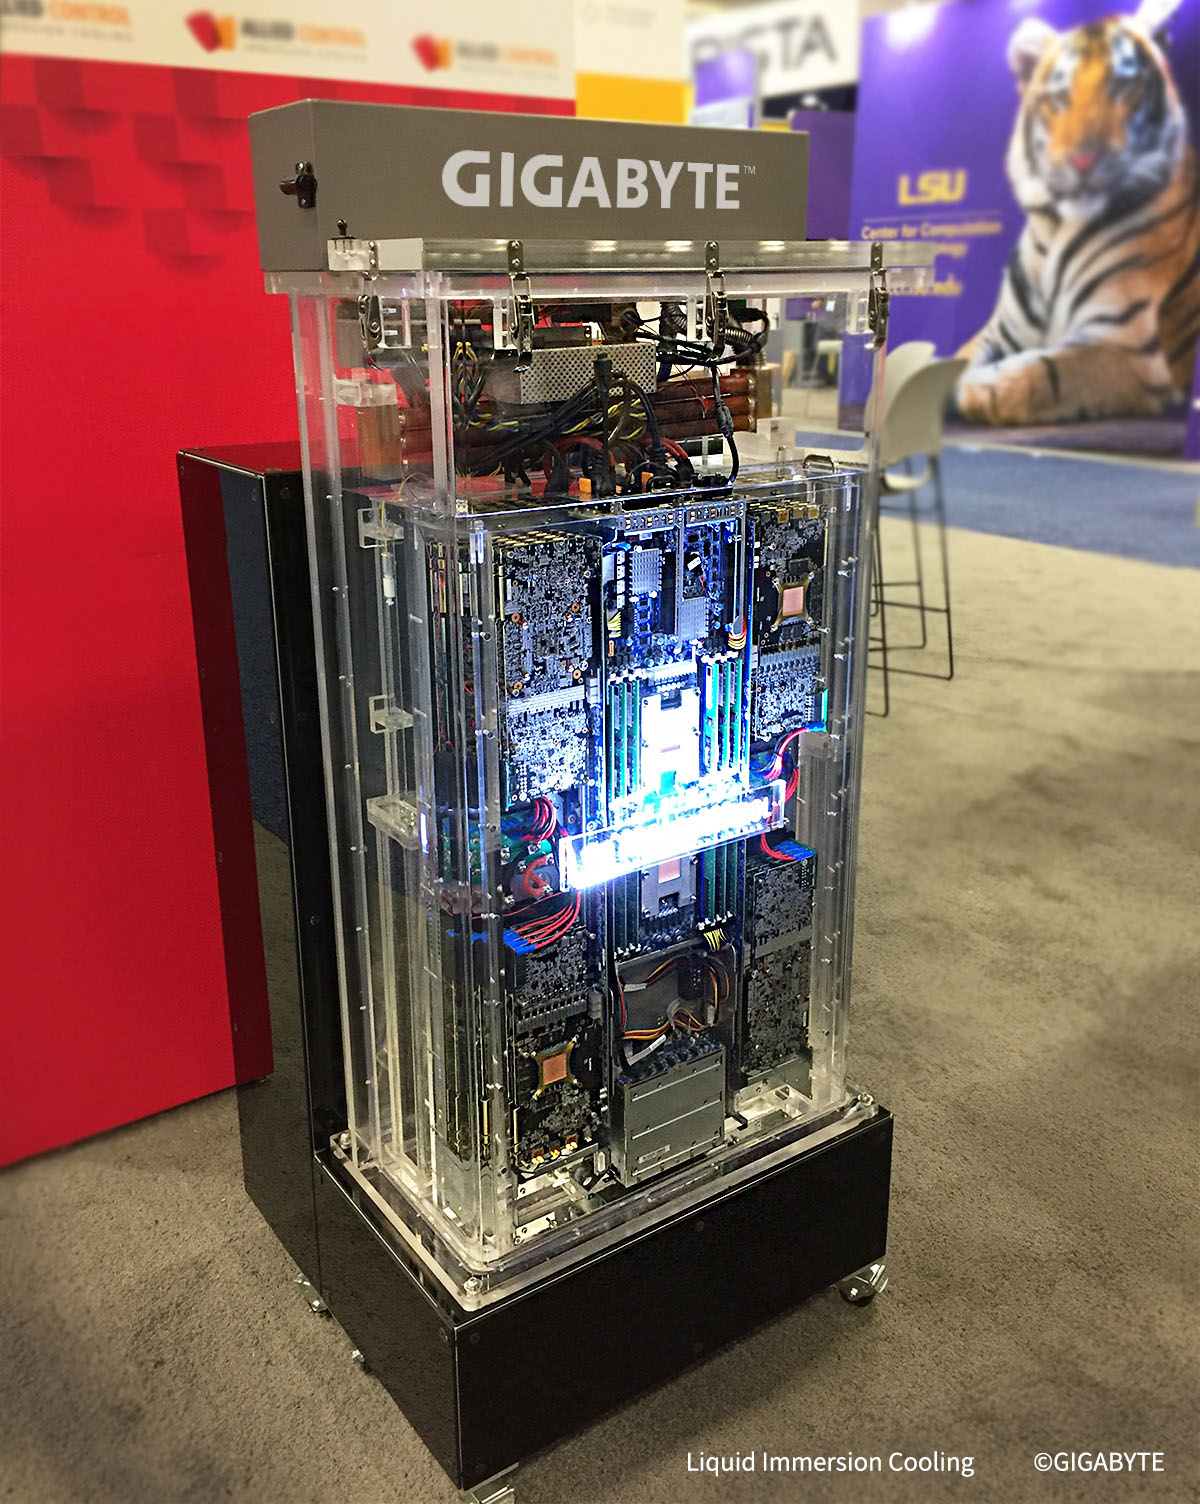 GIGABYTE Liquid Immersion Cooling CES 2019